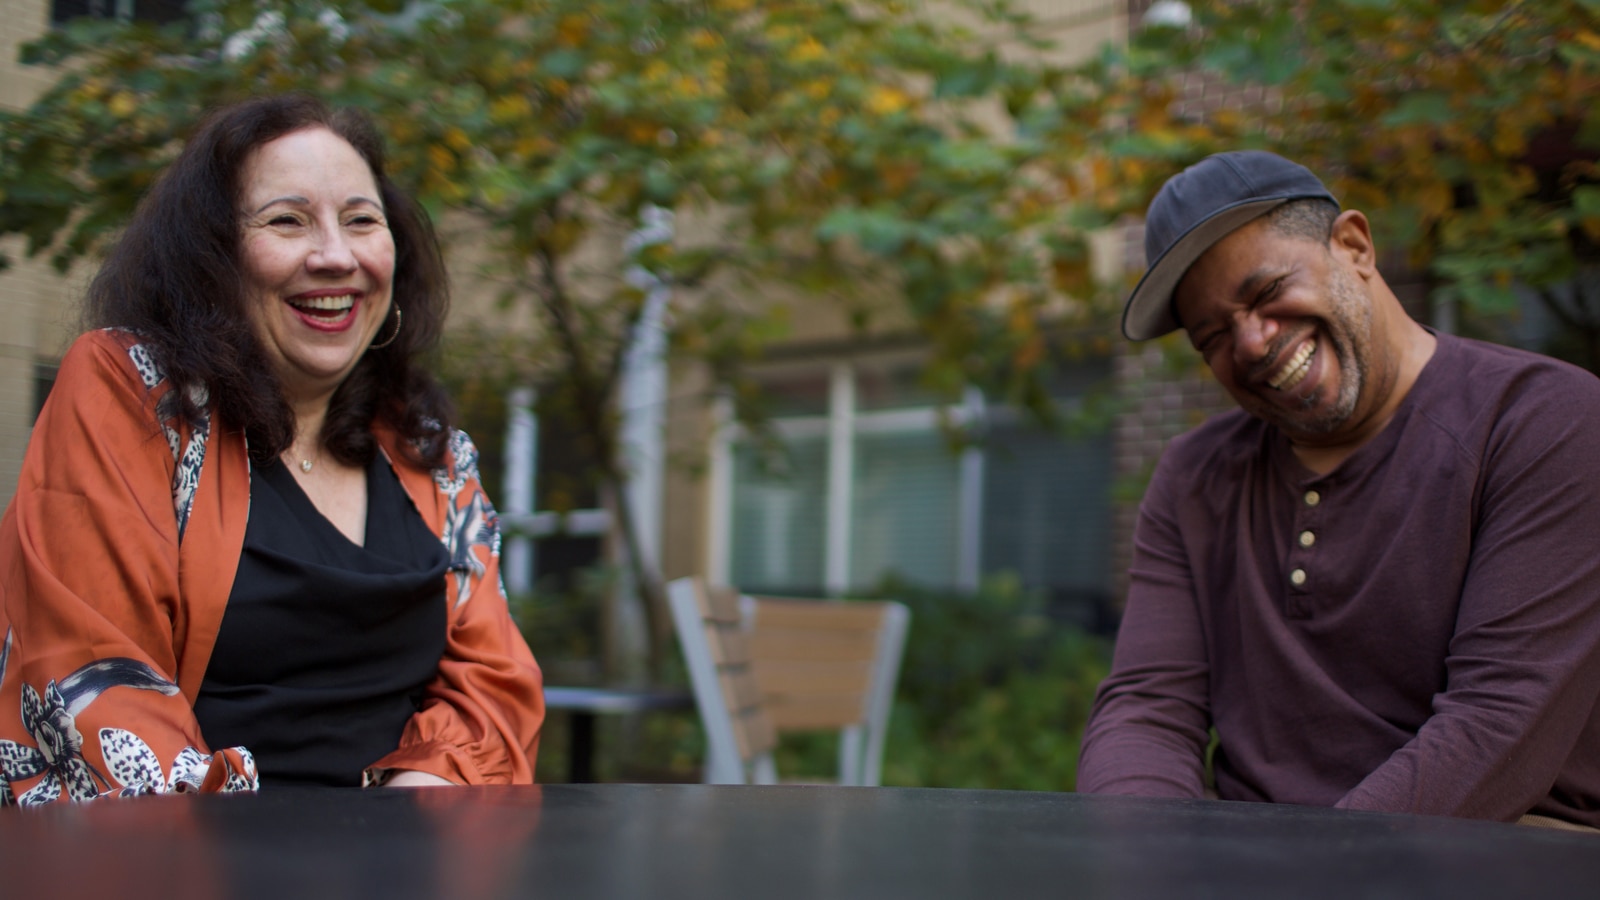 Frances Lopes and Javier Edwards laugh together as they sit at a table outdoors.